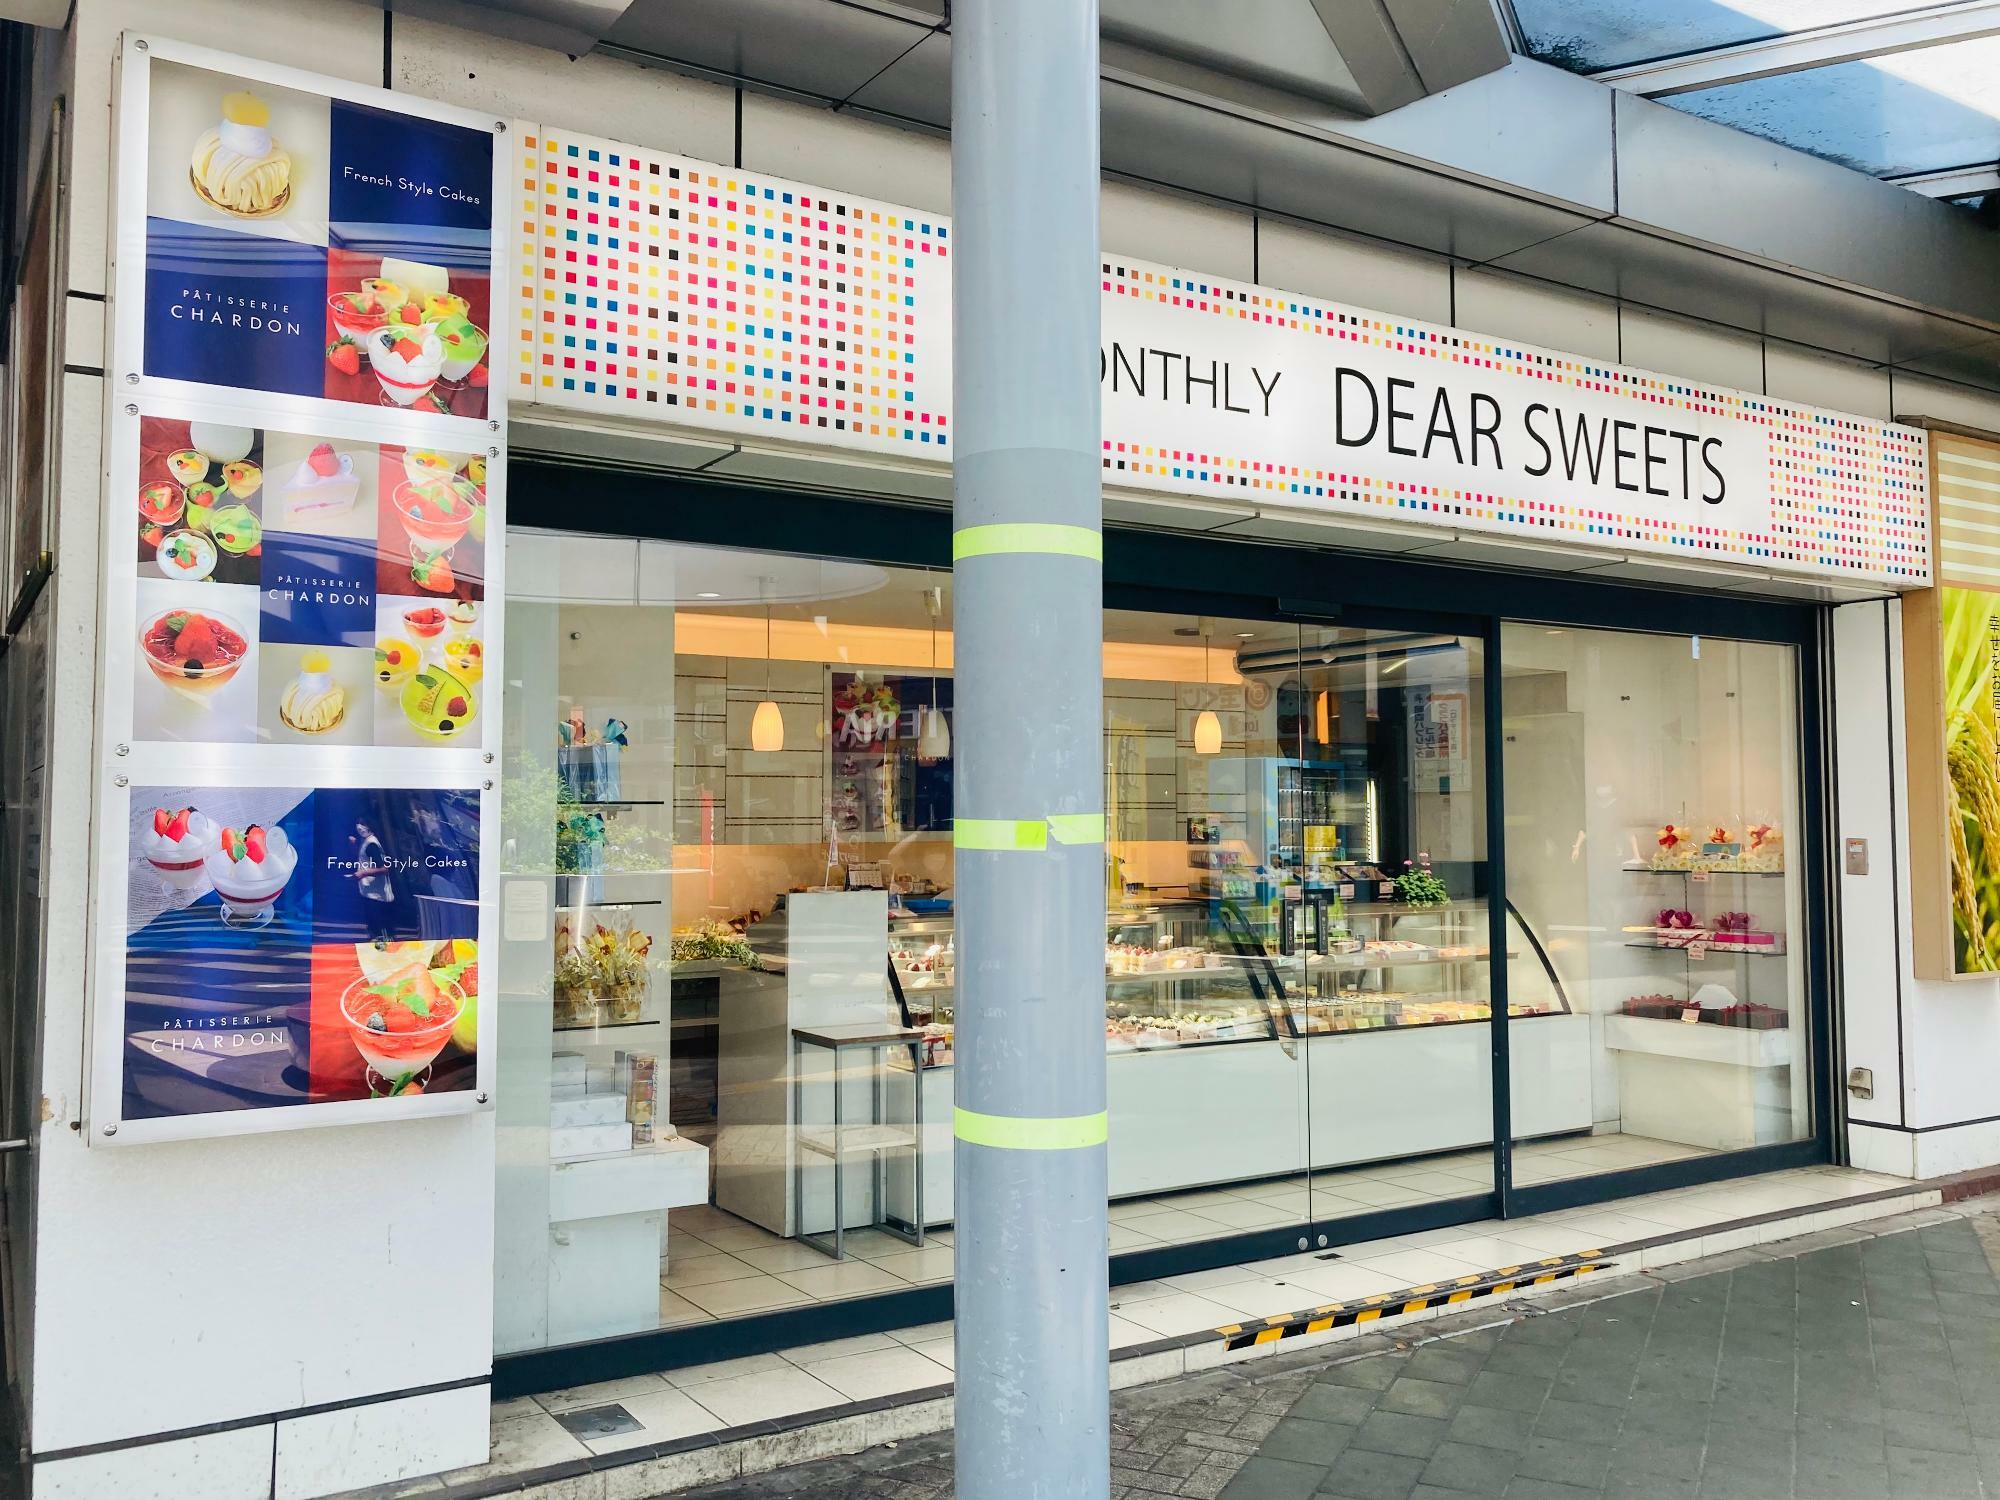 MONTHLY DEAR SWEETS